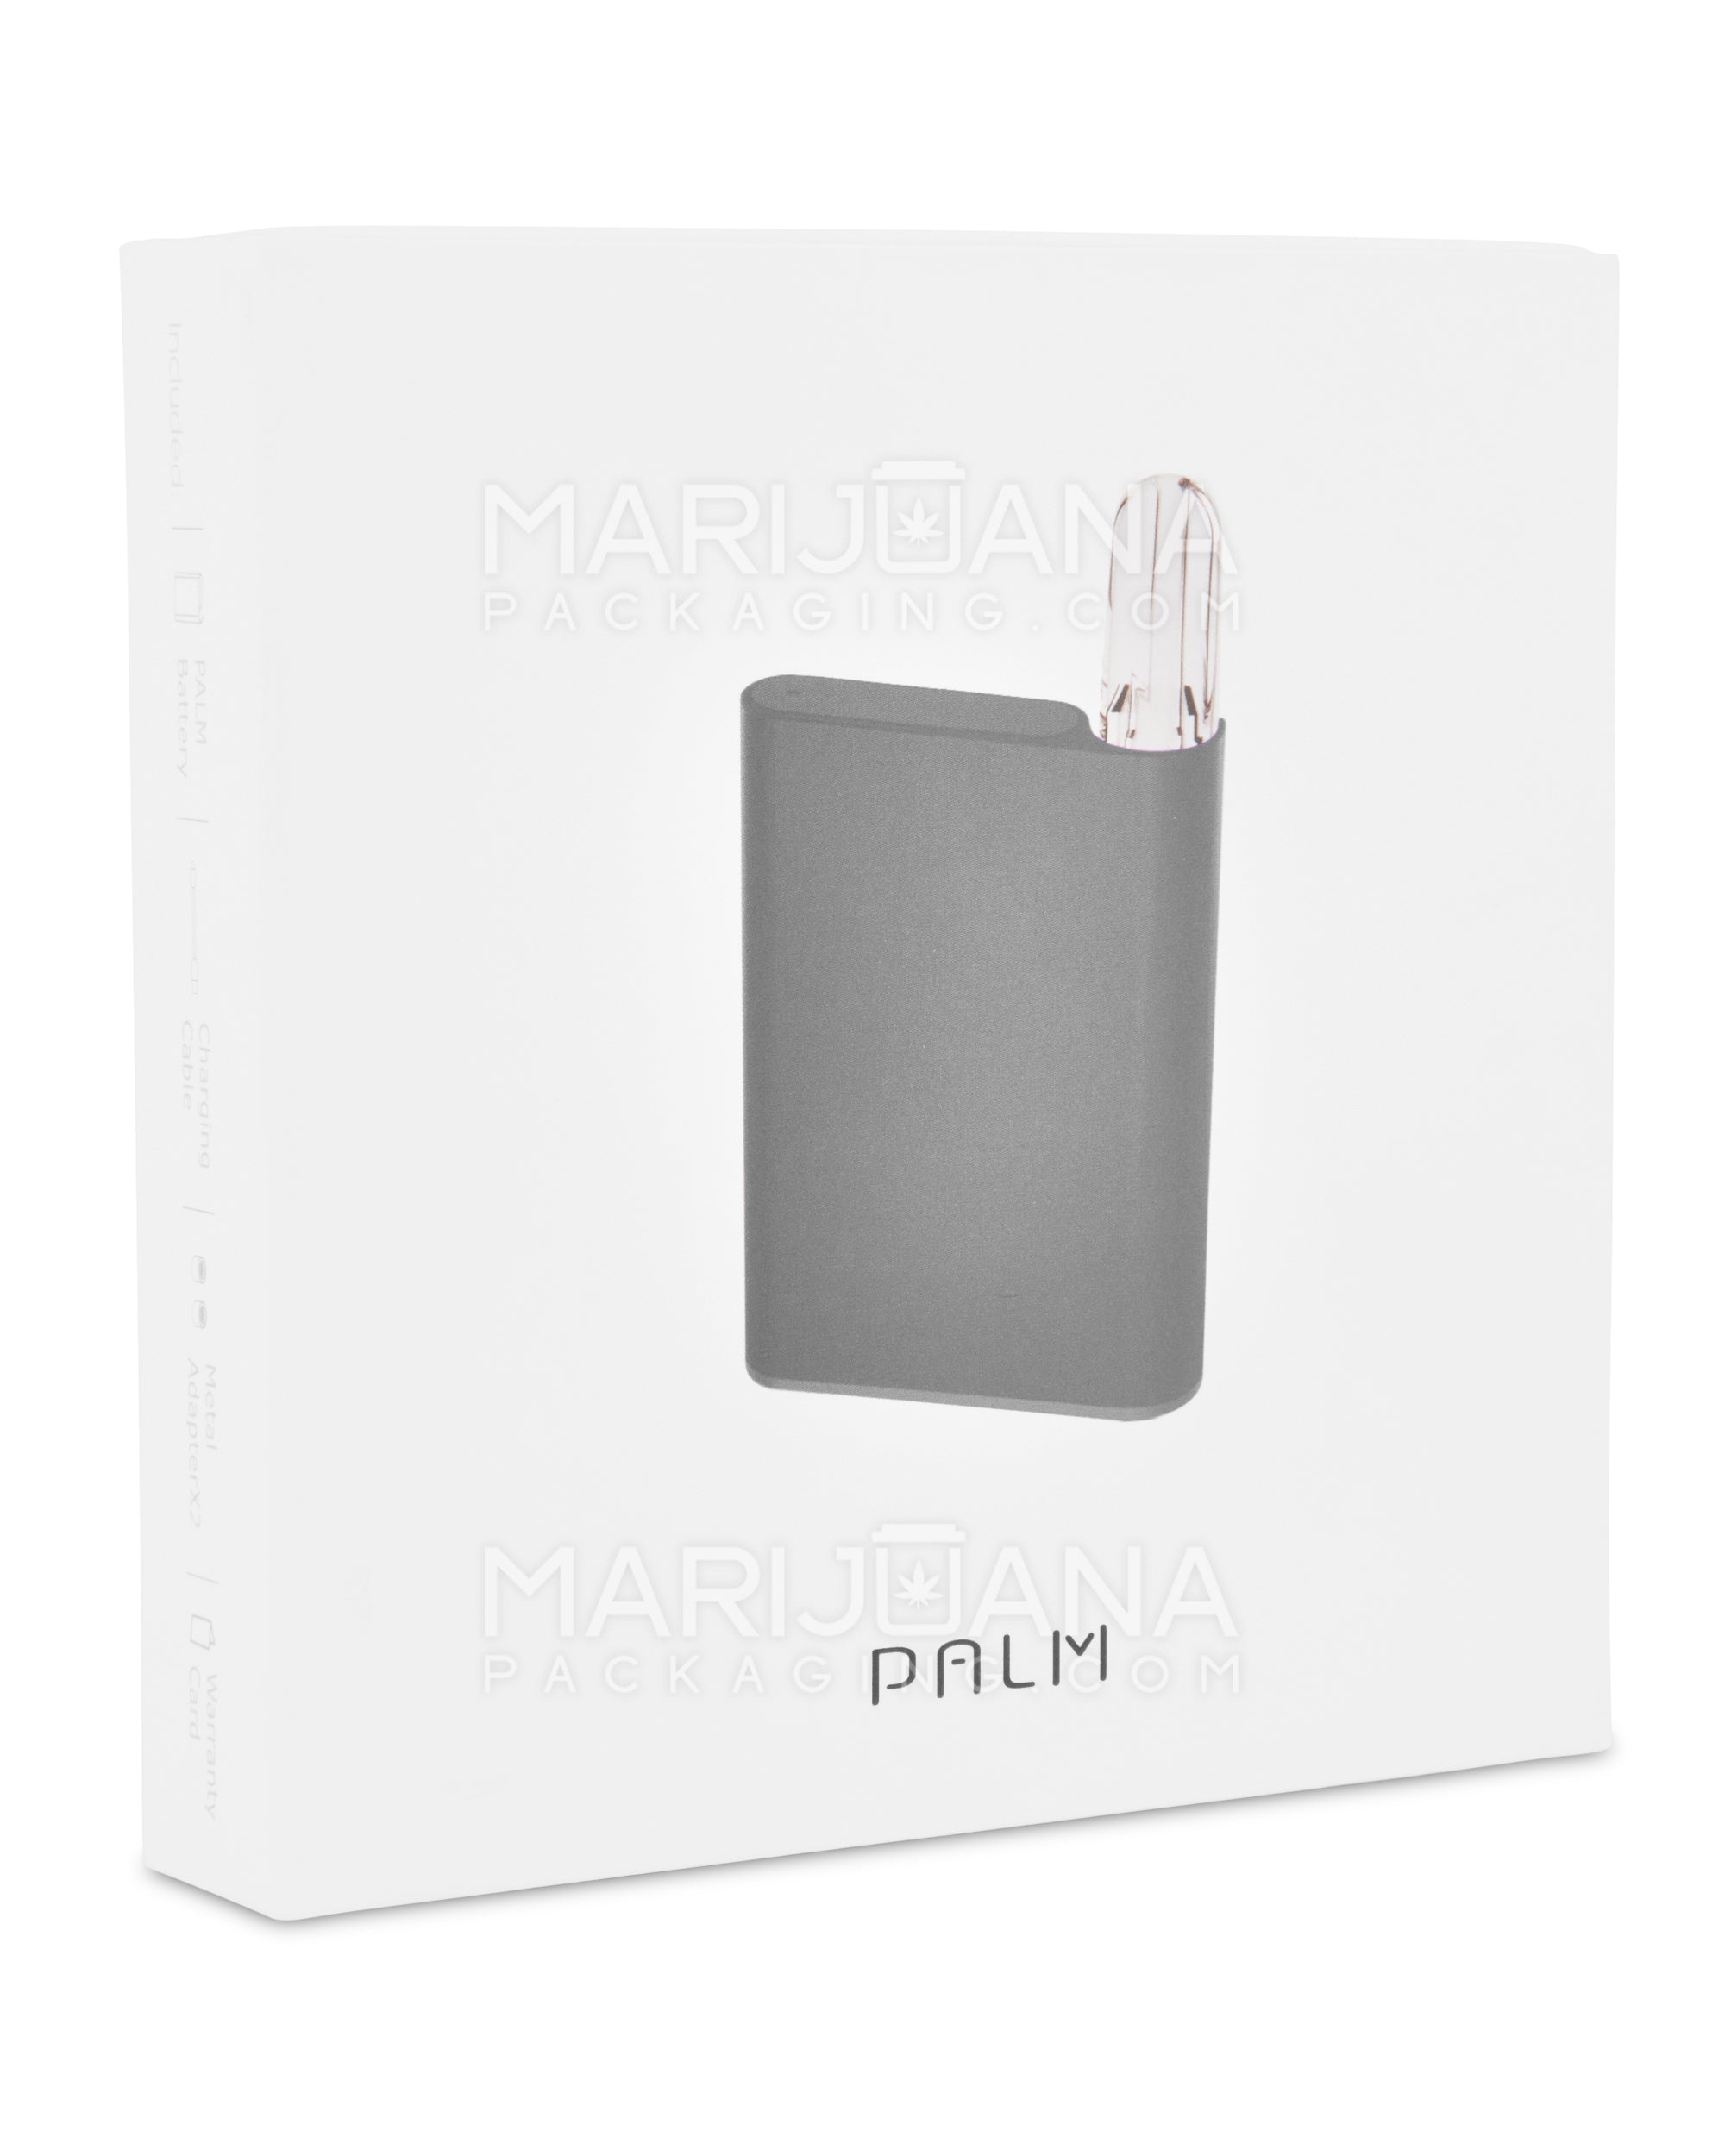 CCELL | Palm Vape Battery with USB Charger | 500mAh - Gray - 510 Thread - 8